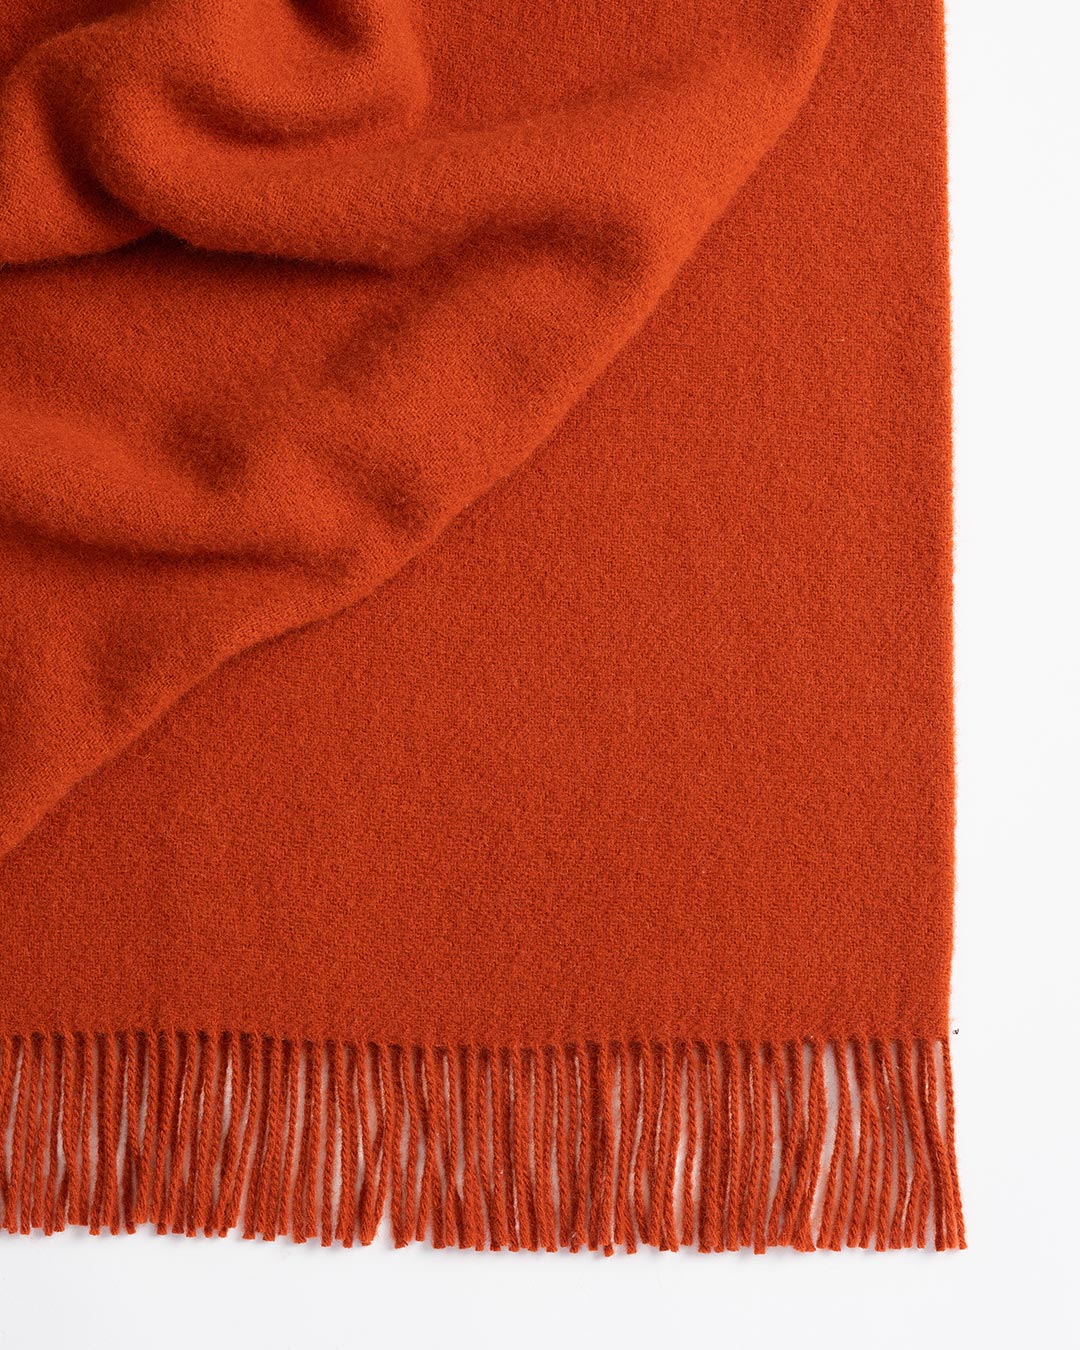 Made from 100% New Zealand lambswool, Nevis throw blankets in umber are simply luxurious. All of our throws make the perfect companion over cooler days and nights, and can also be enjoyed outdoors